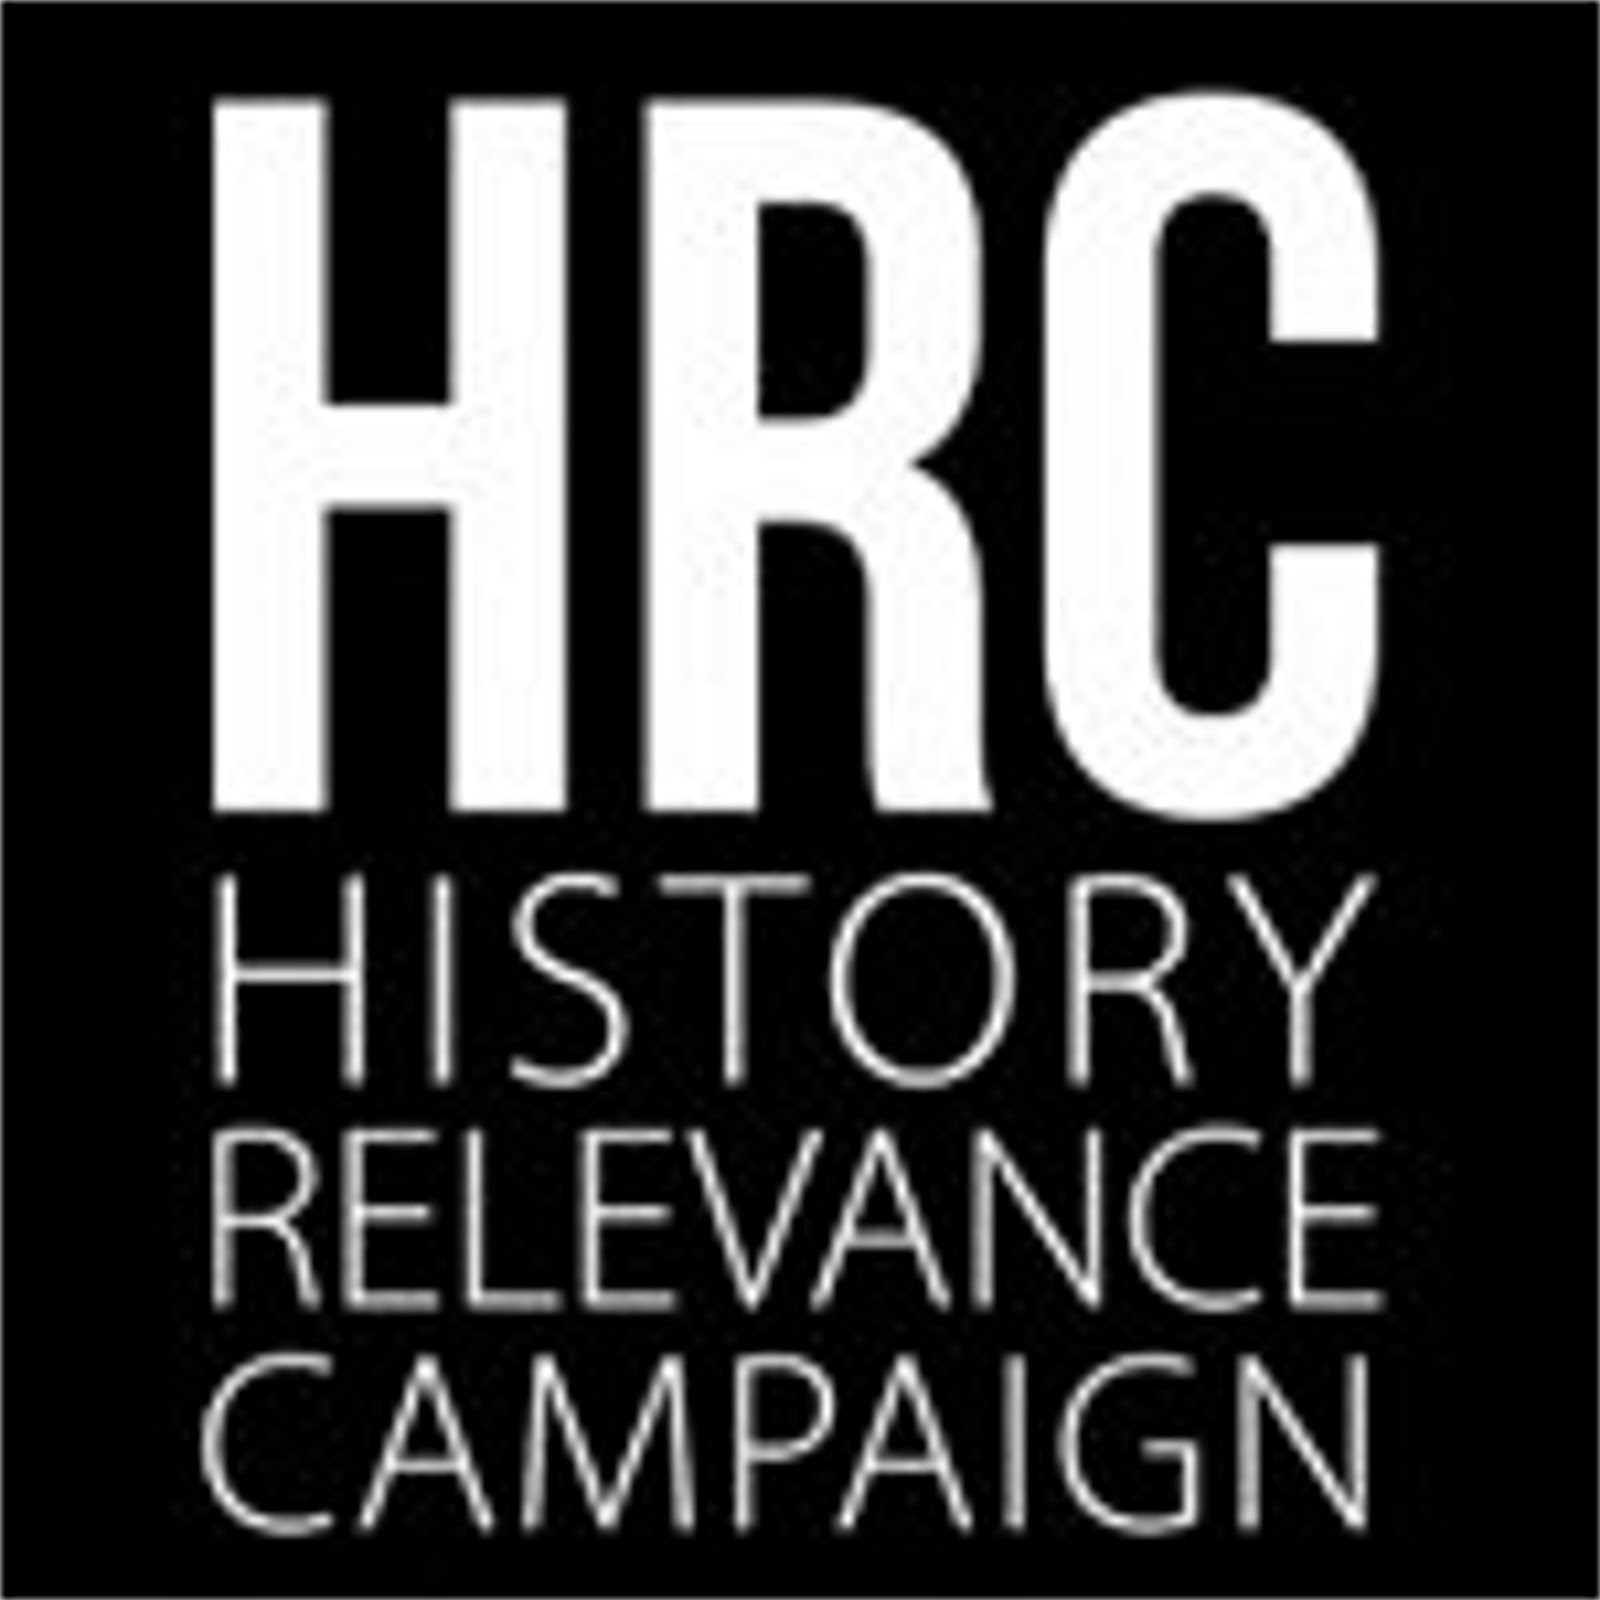 History Relevance Campaign